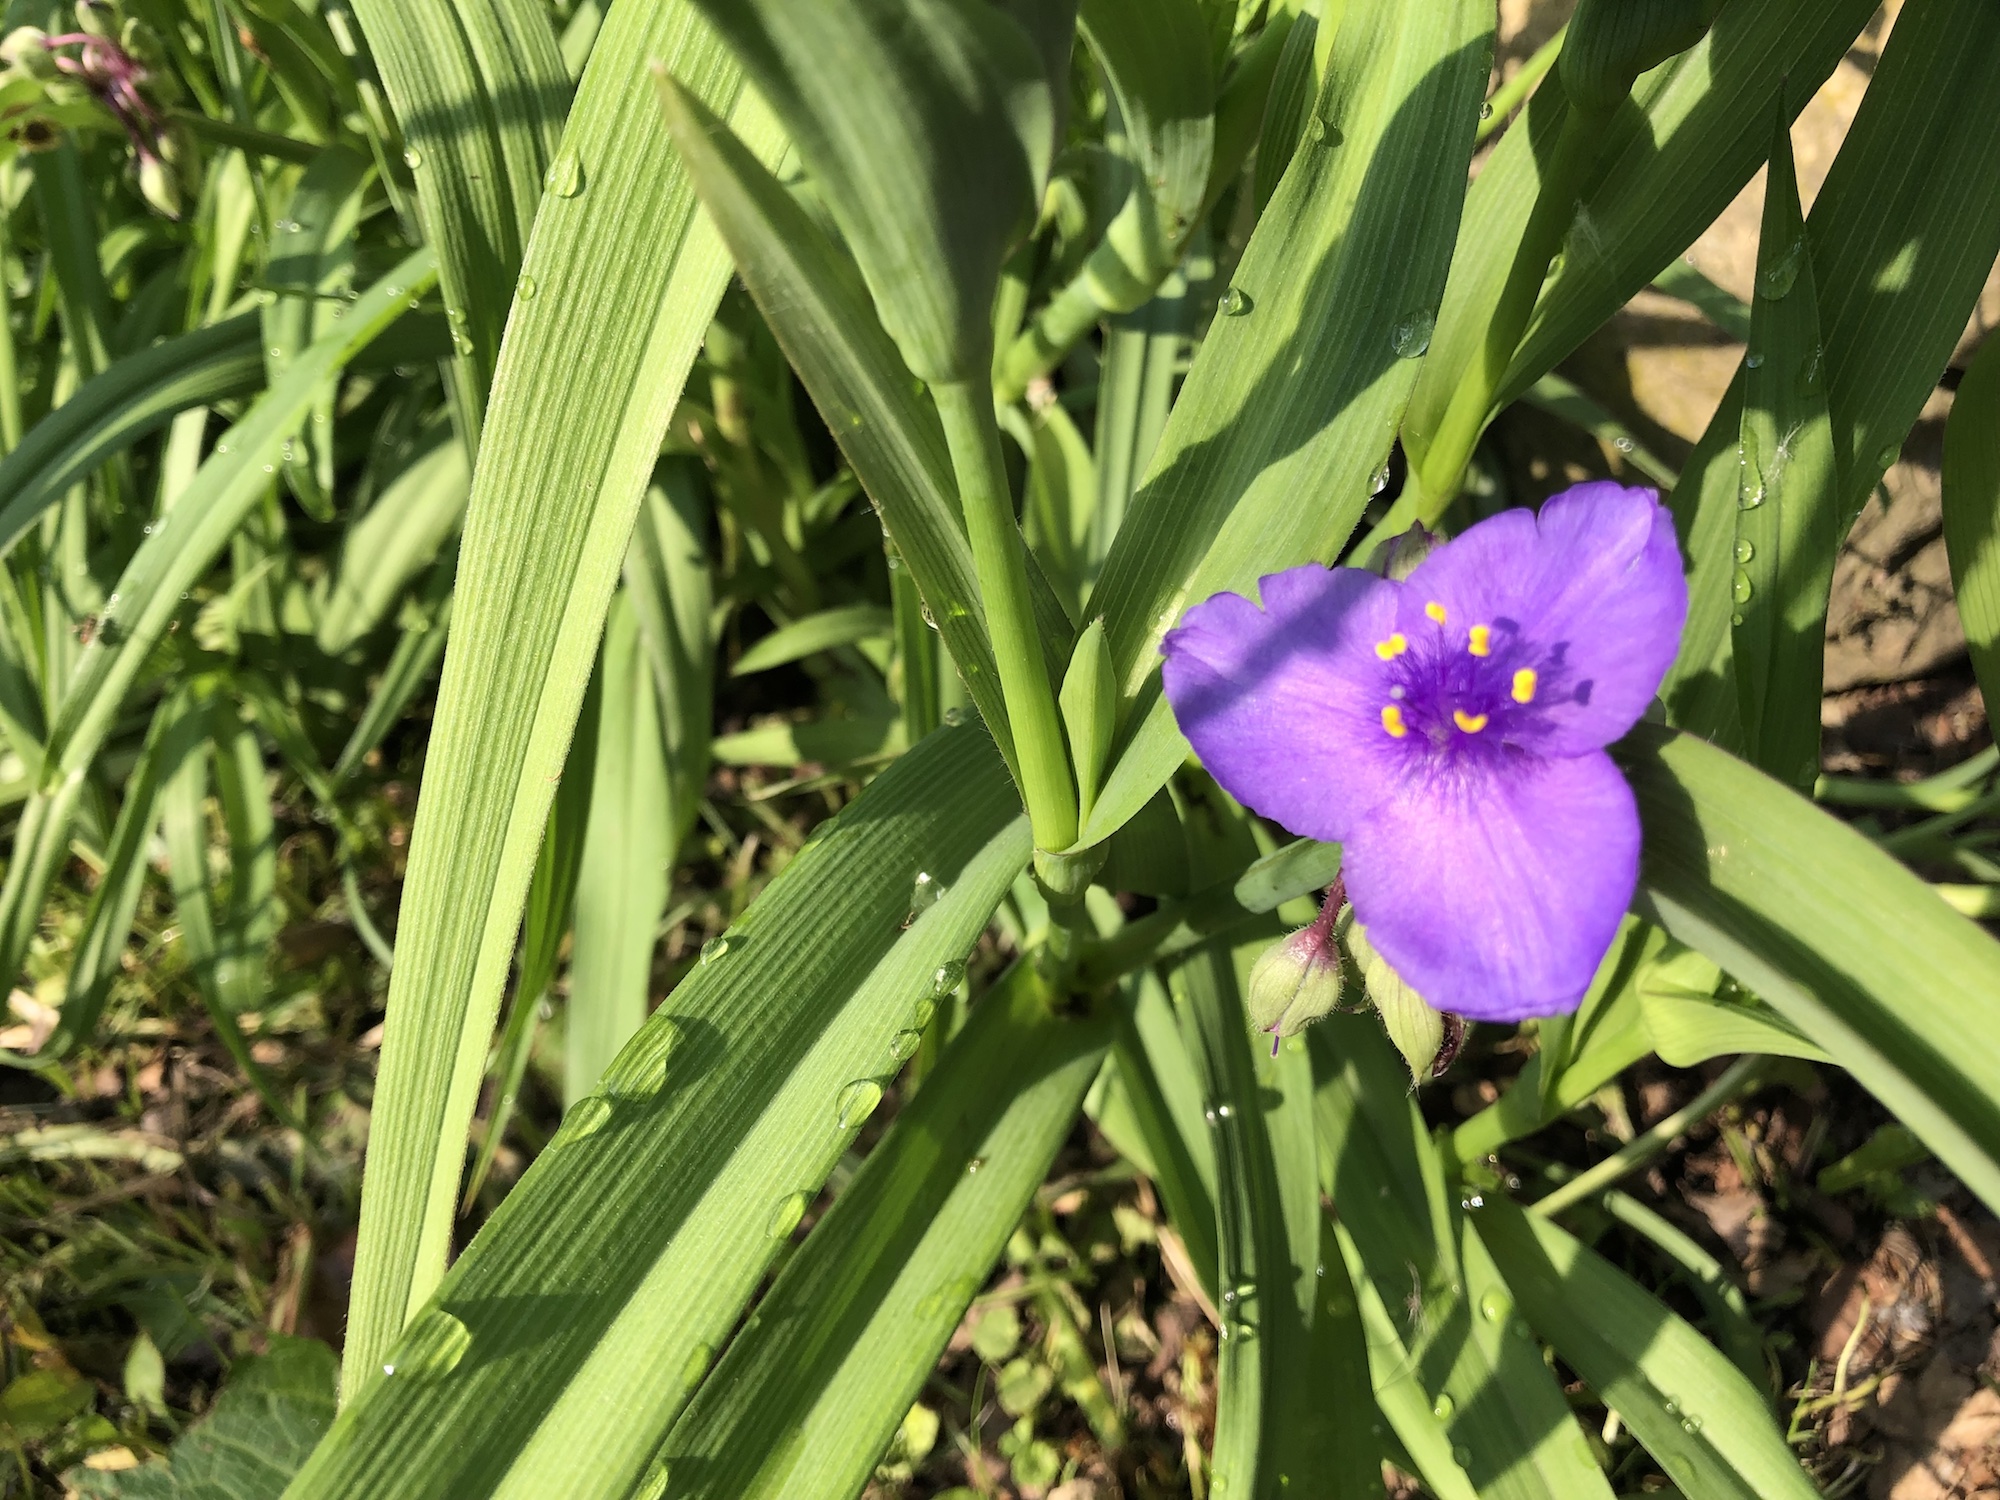 Spiderwort along stone walls and steps of Duck Pond in Madison, Wisconsin on June 6, 2019.